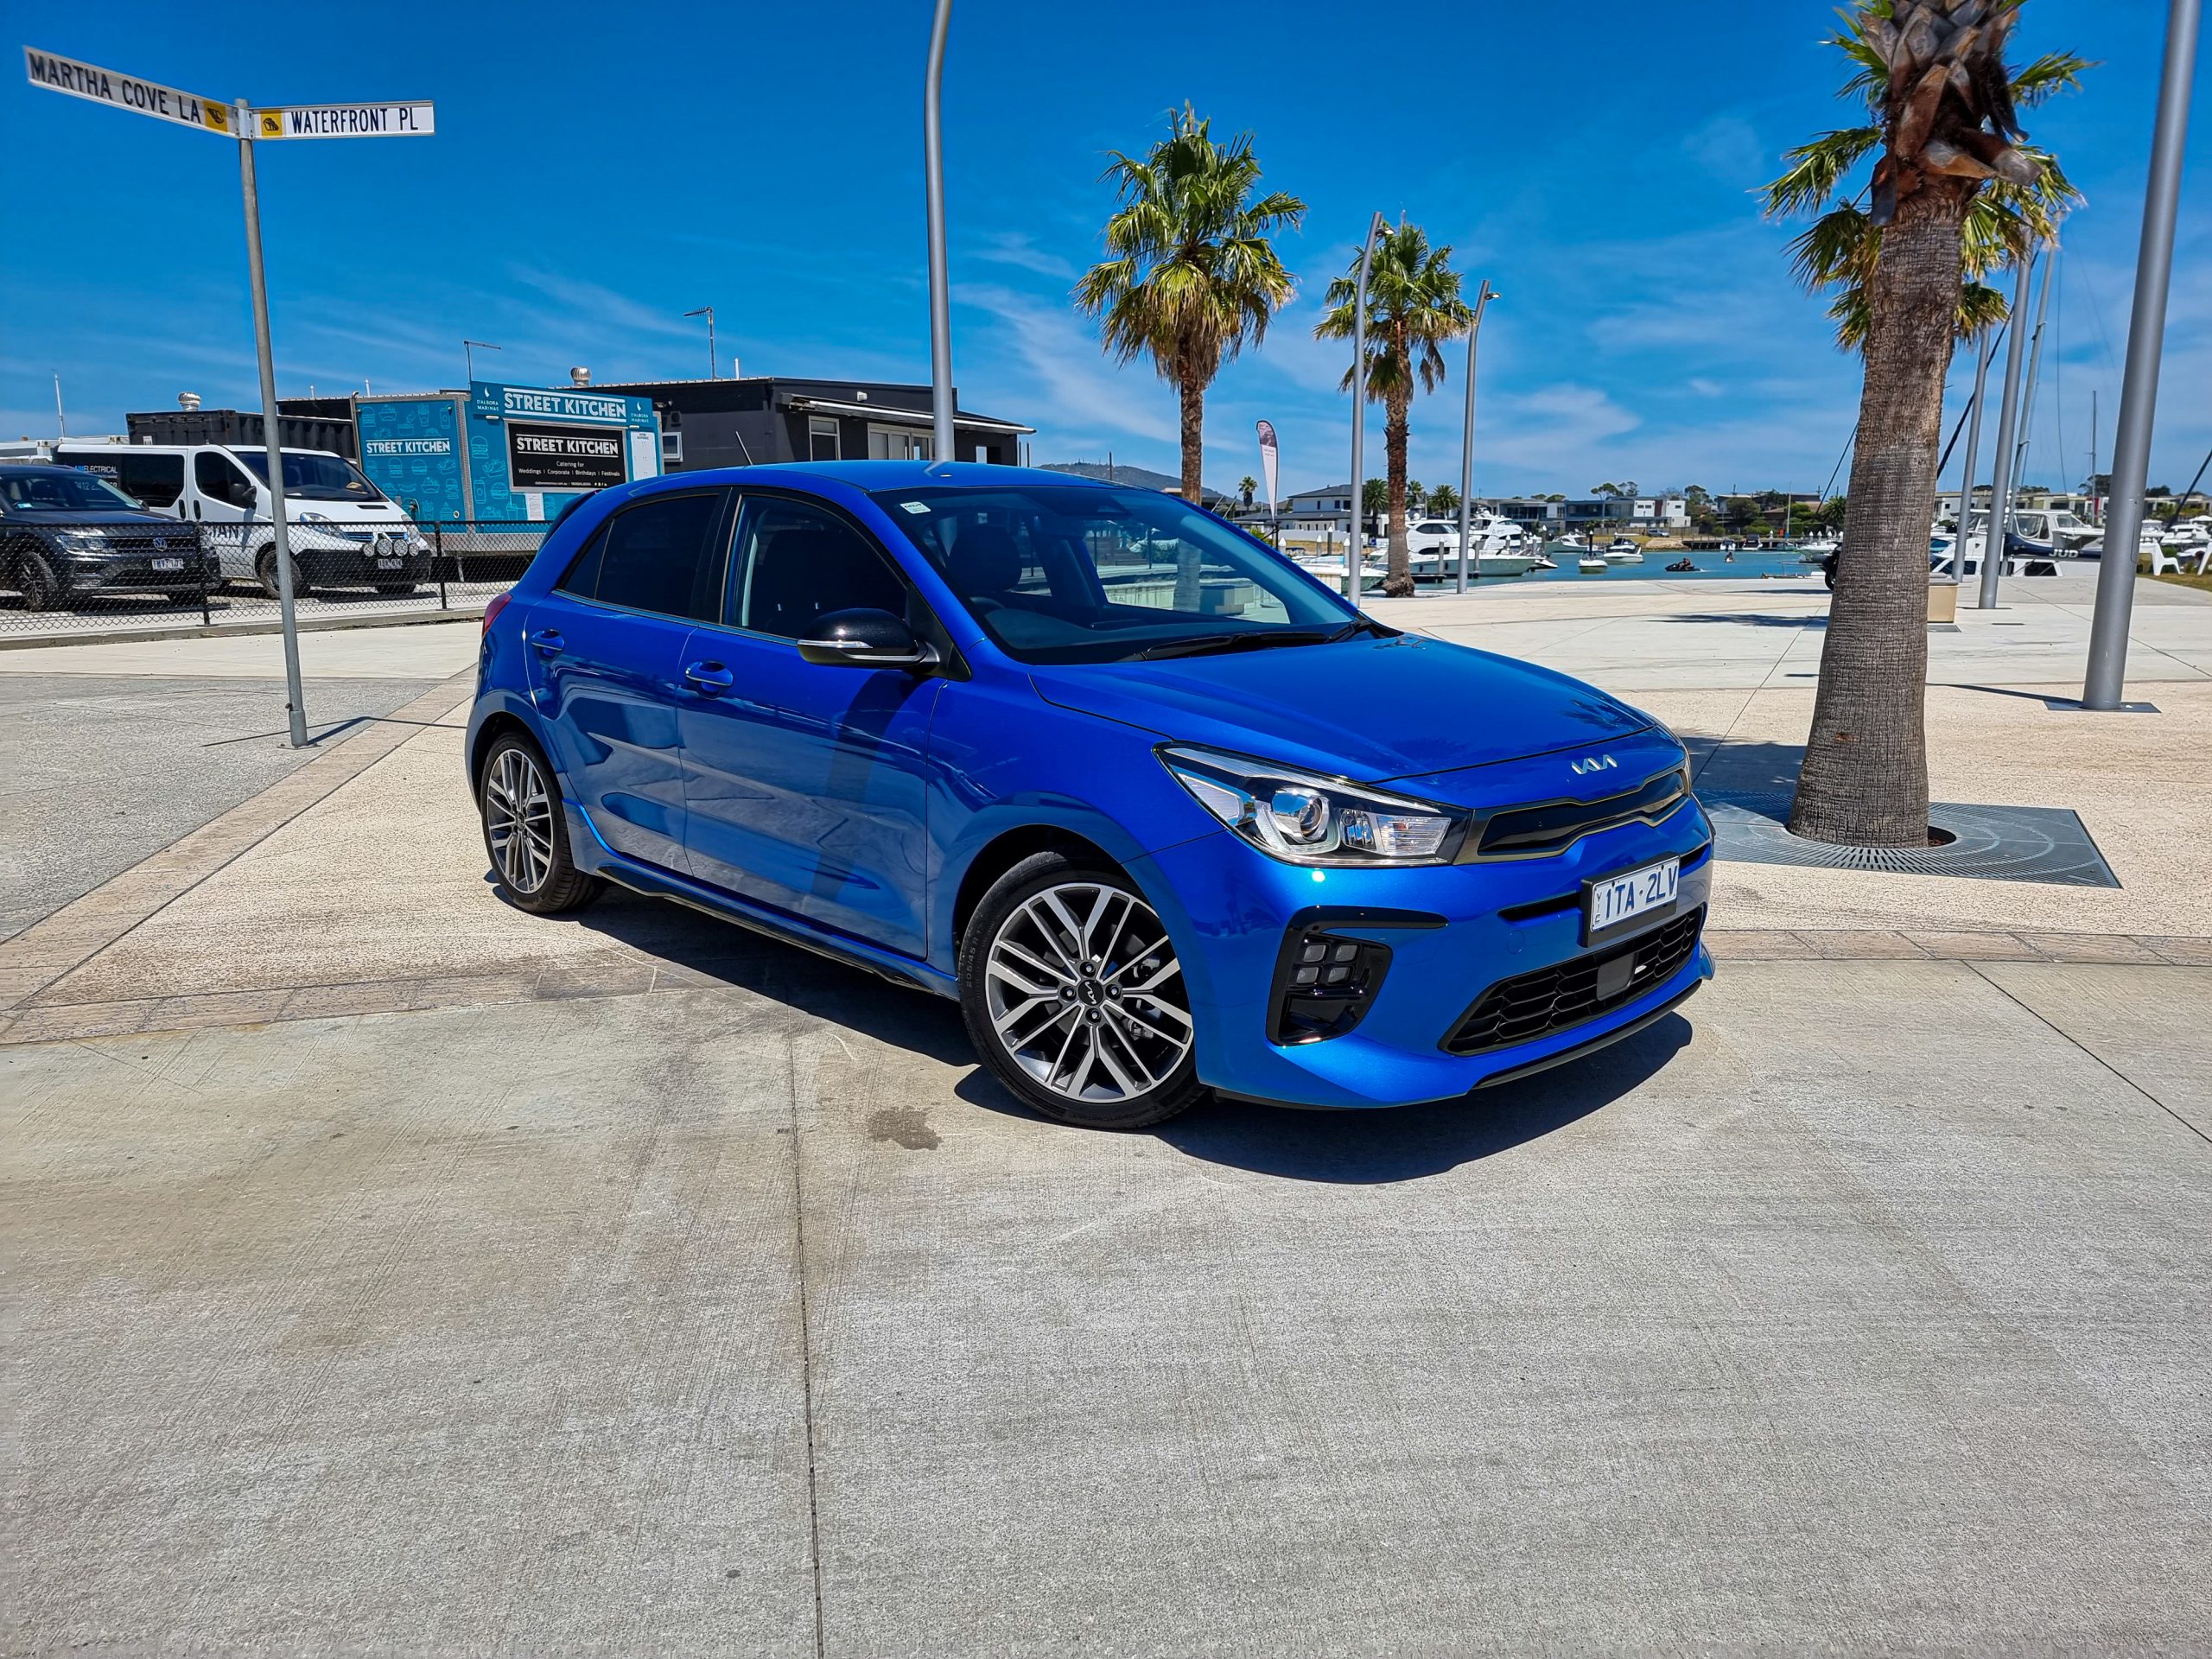 Everything You Need to Know About the 2022 Kia Rio